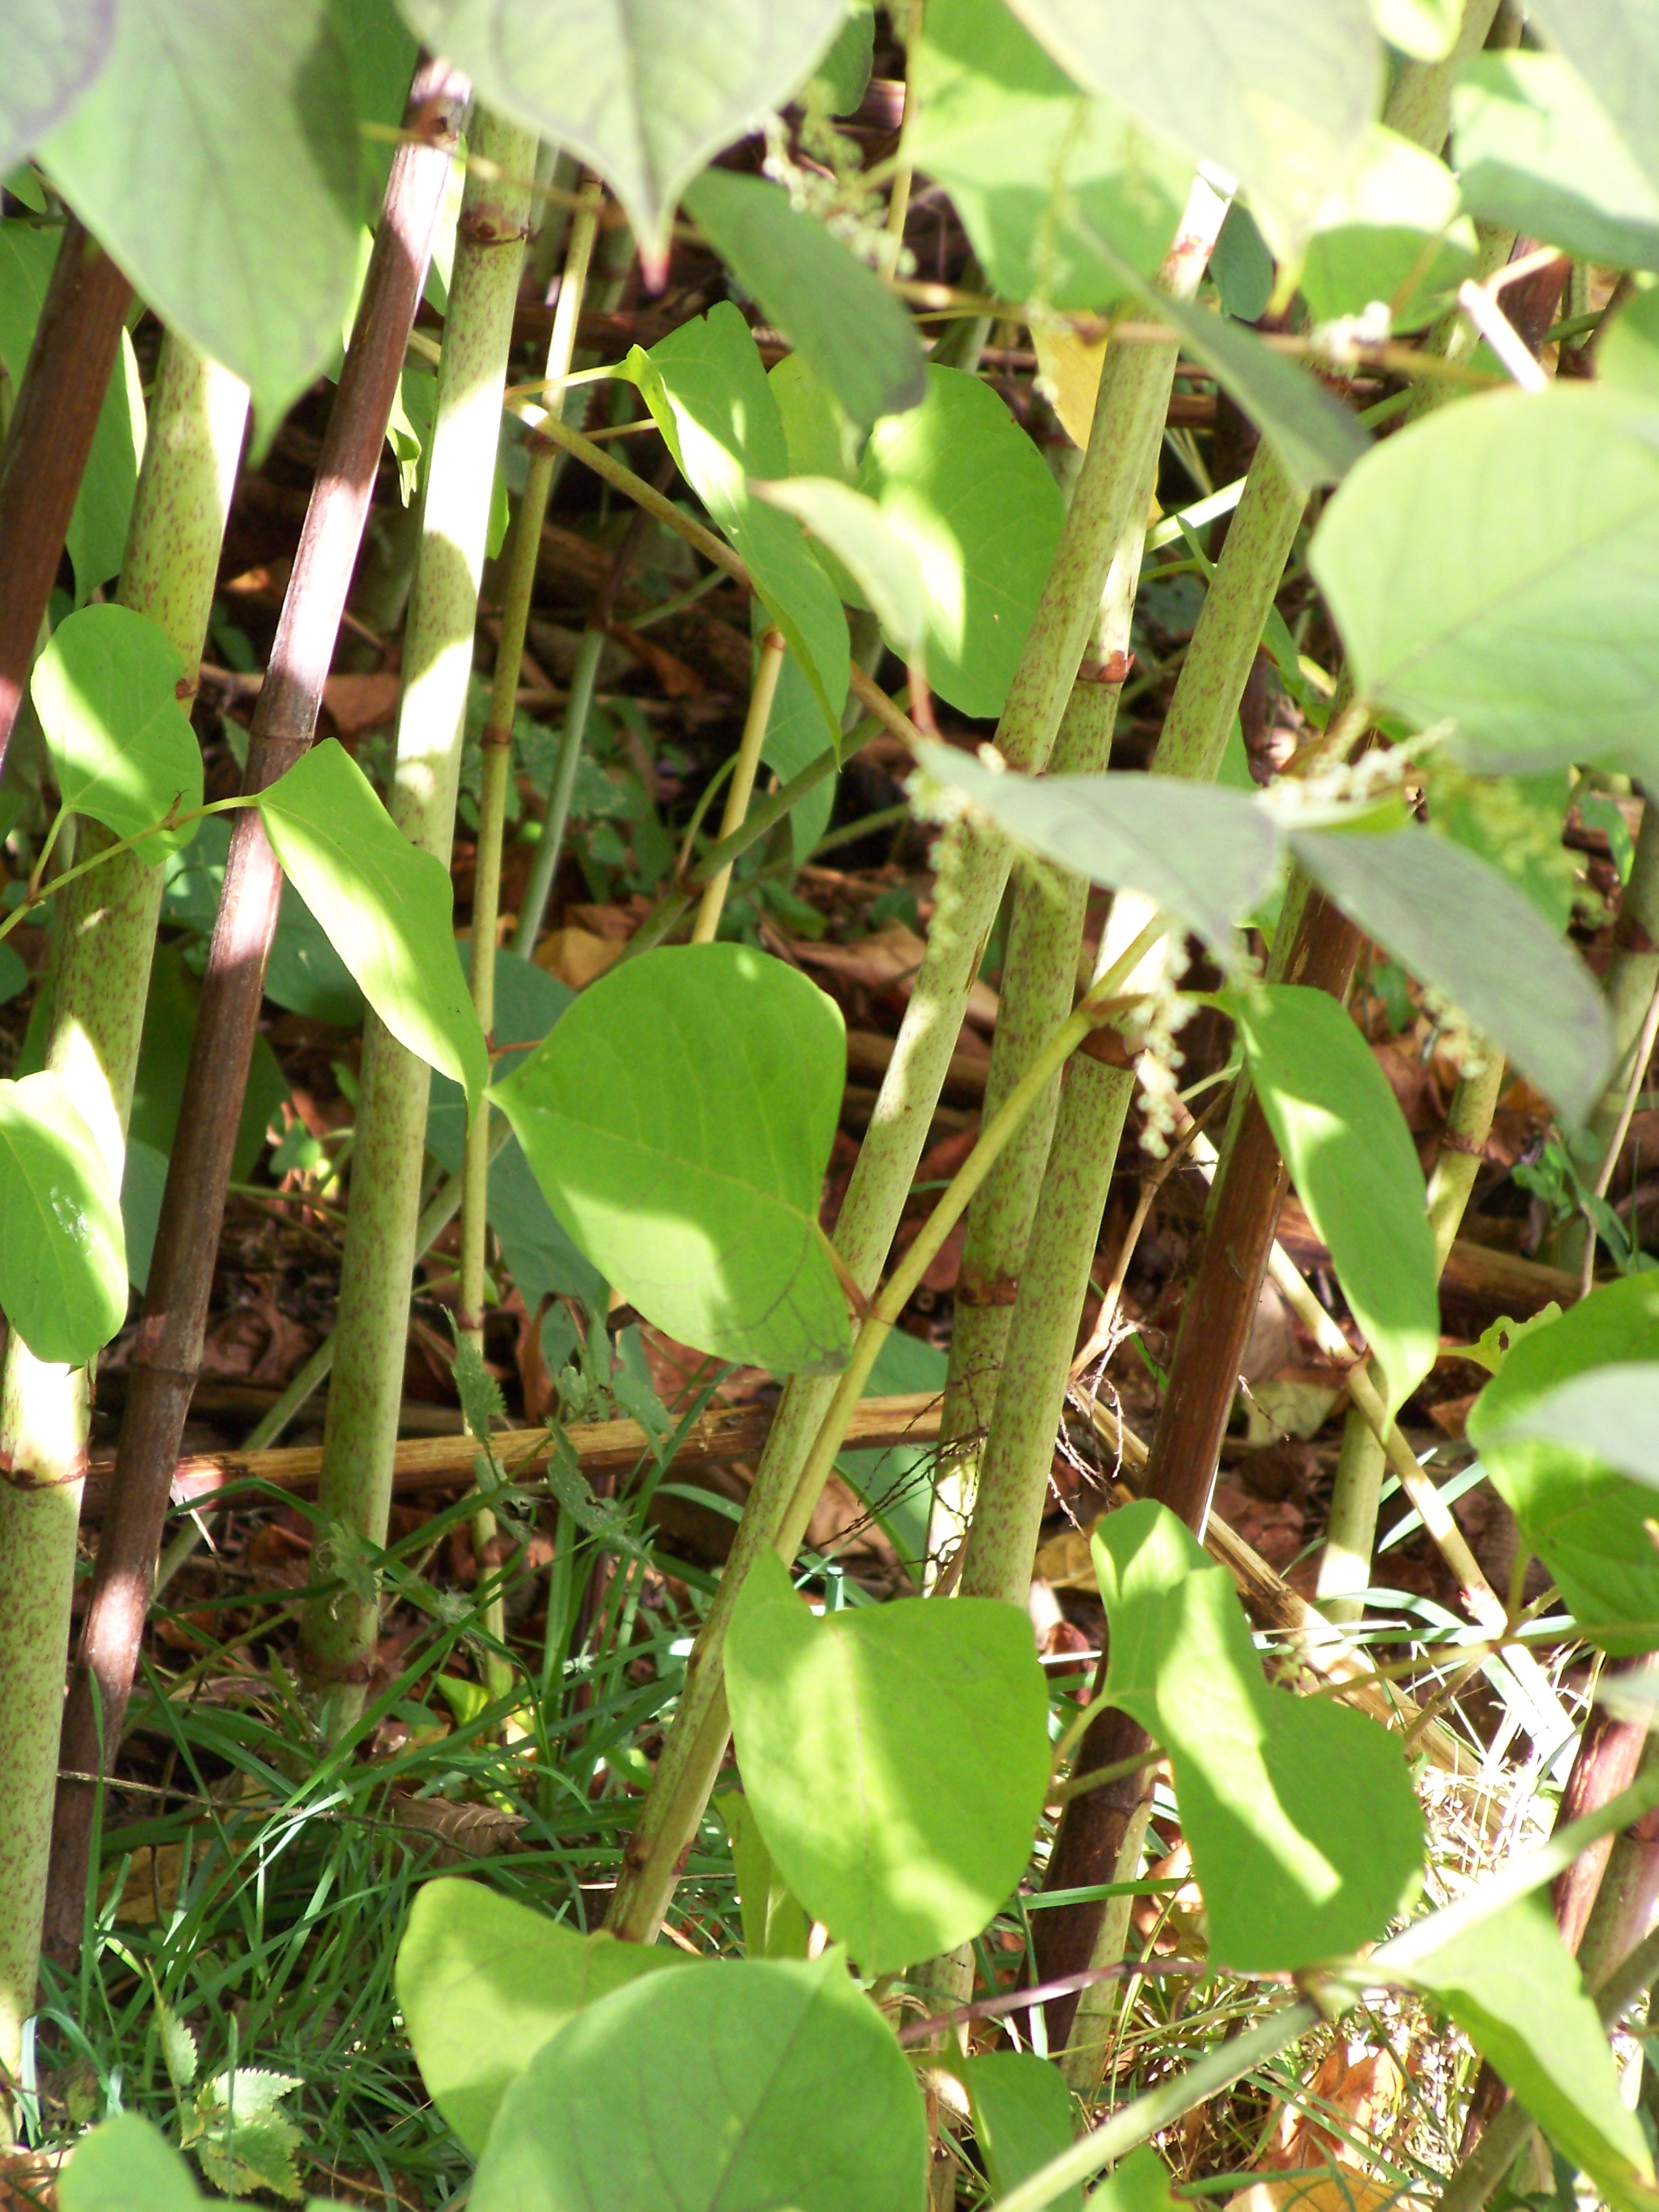 Trade body develops specialist course on Japanese knotweed for surveyors